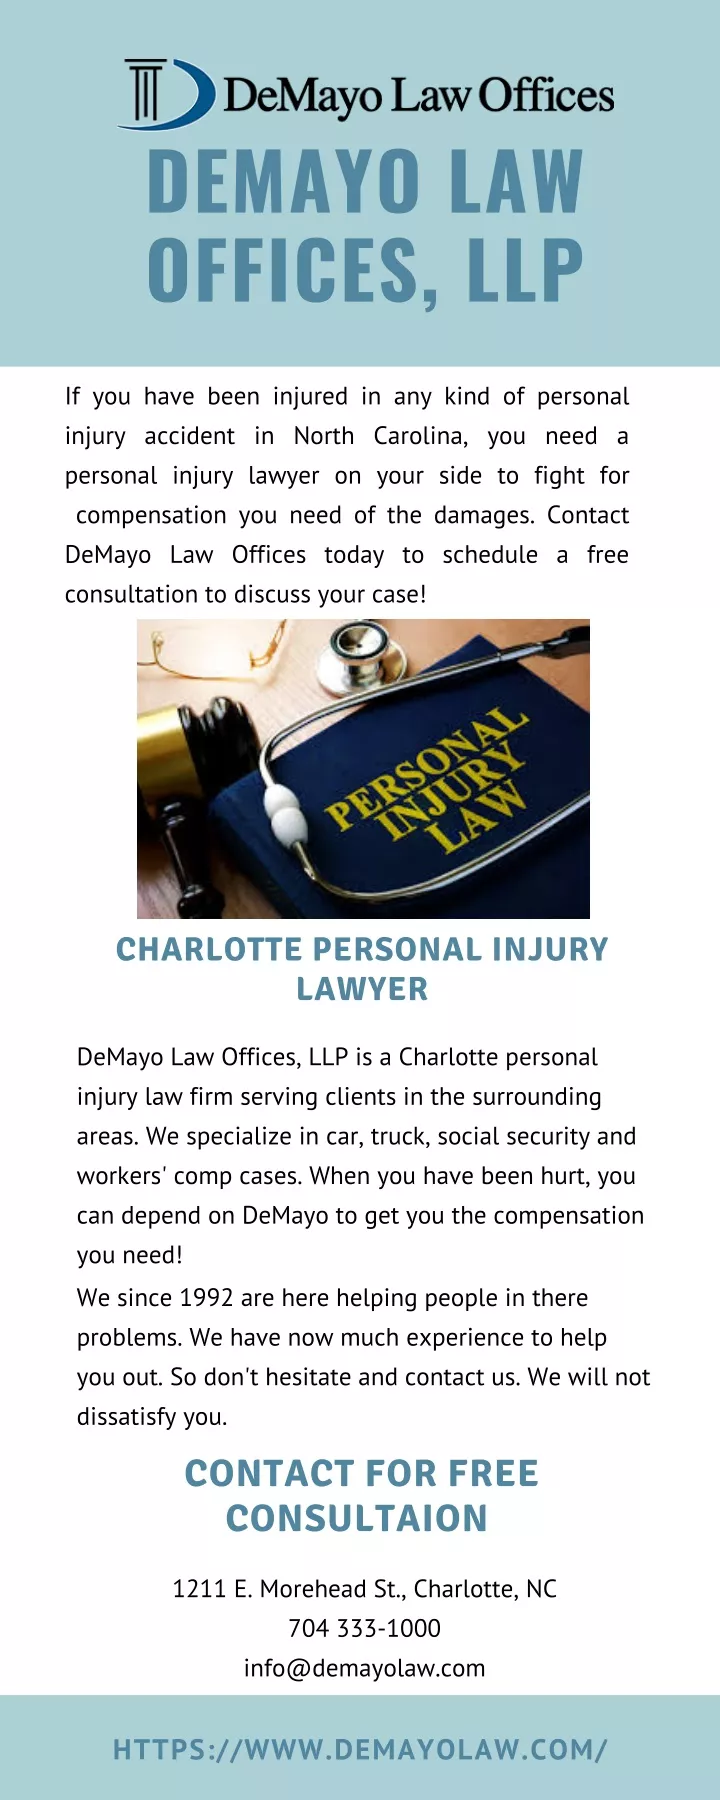 demayo law offices llp